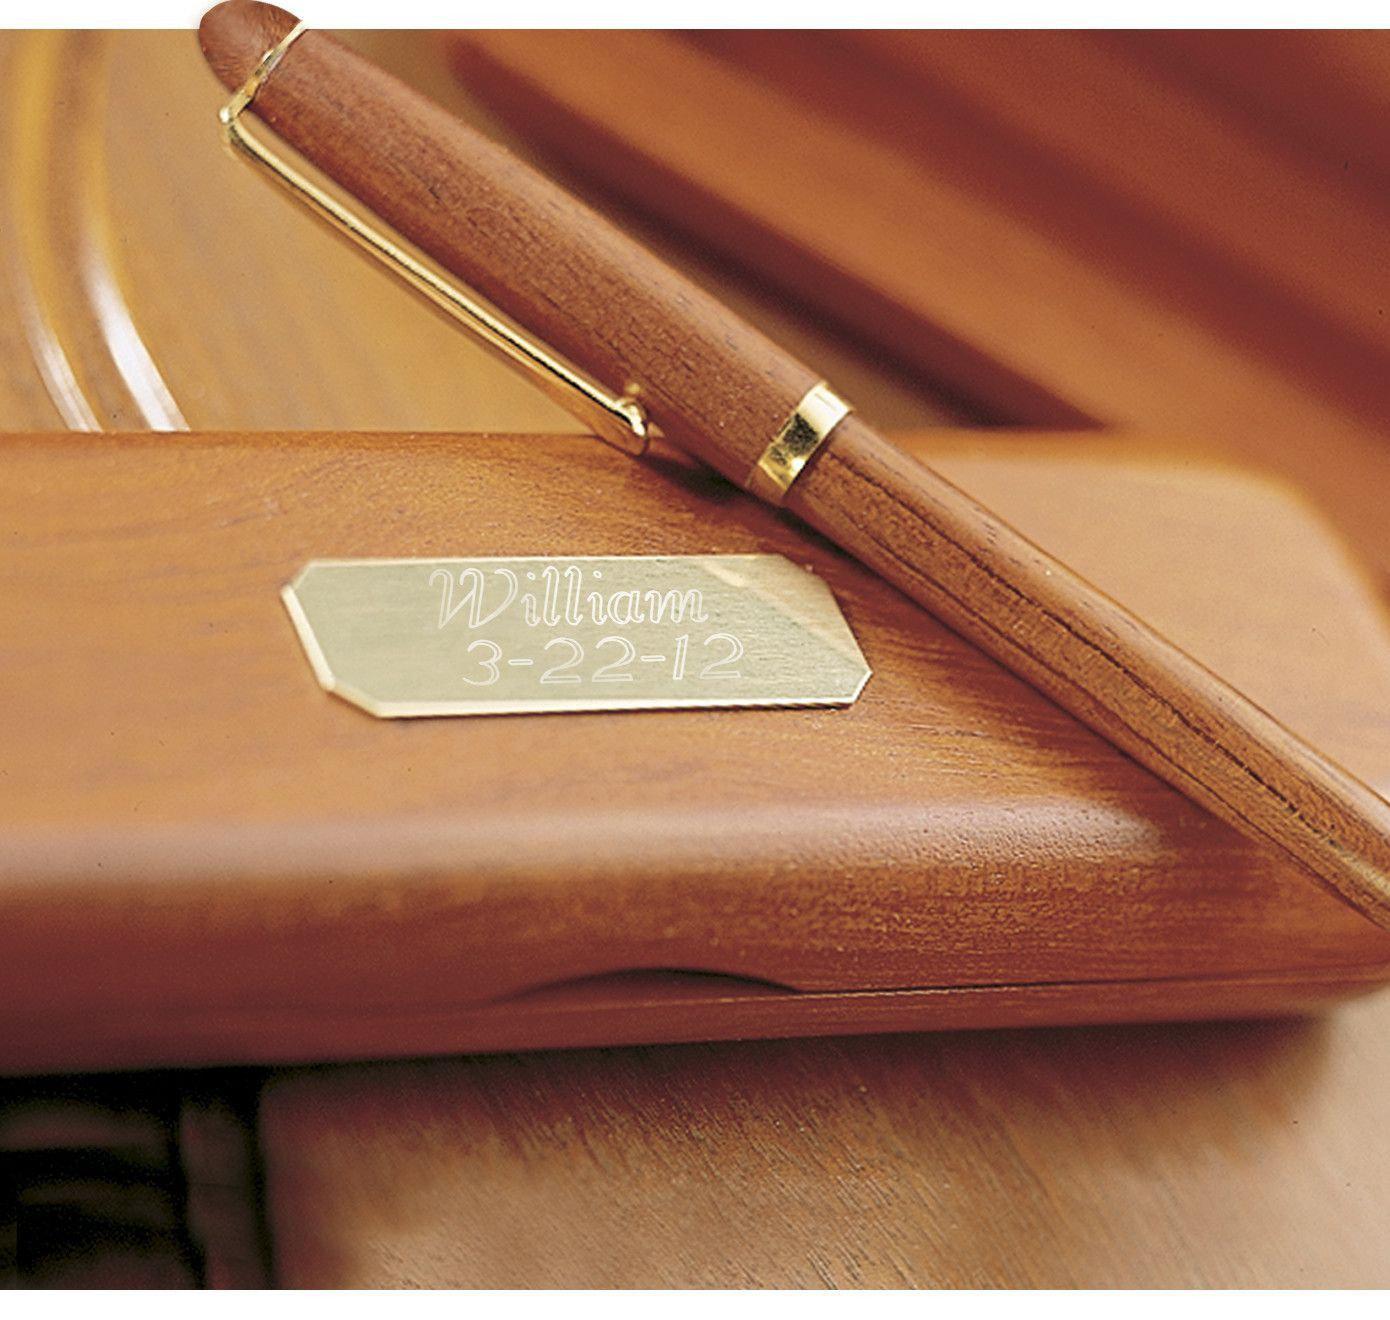 Rosewood Pen and Case Set